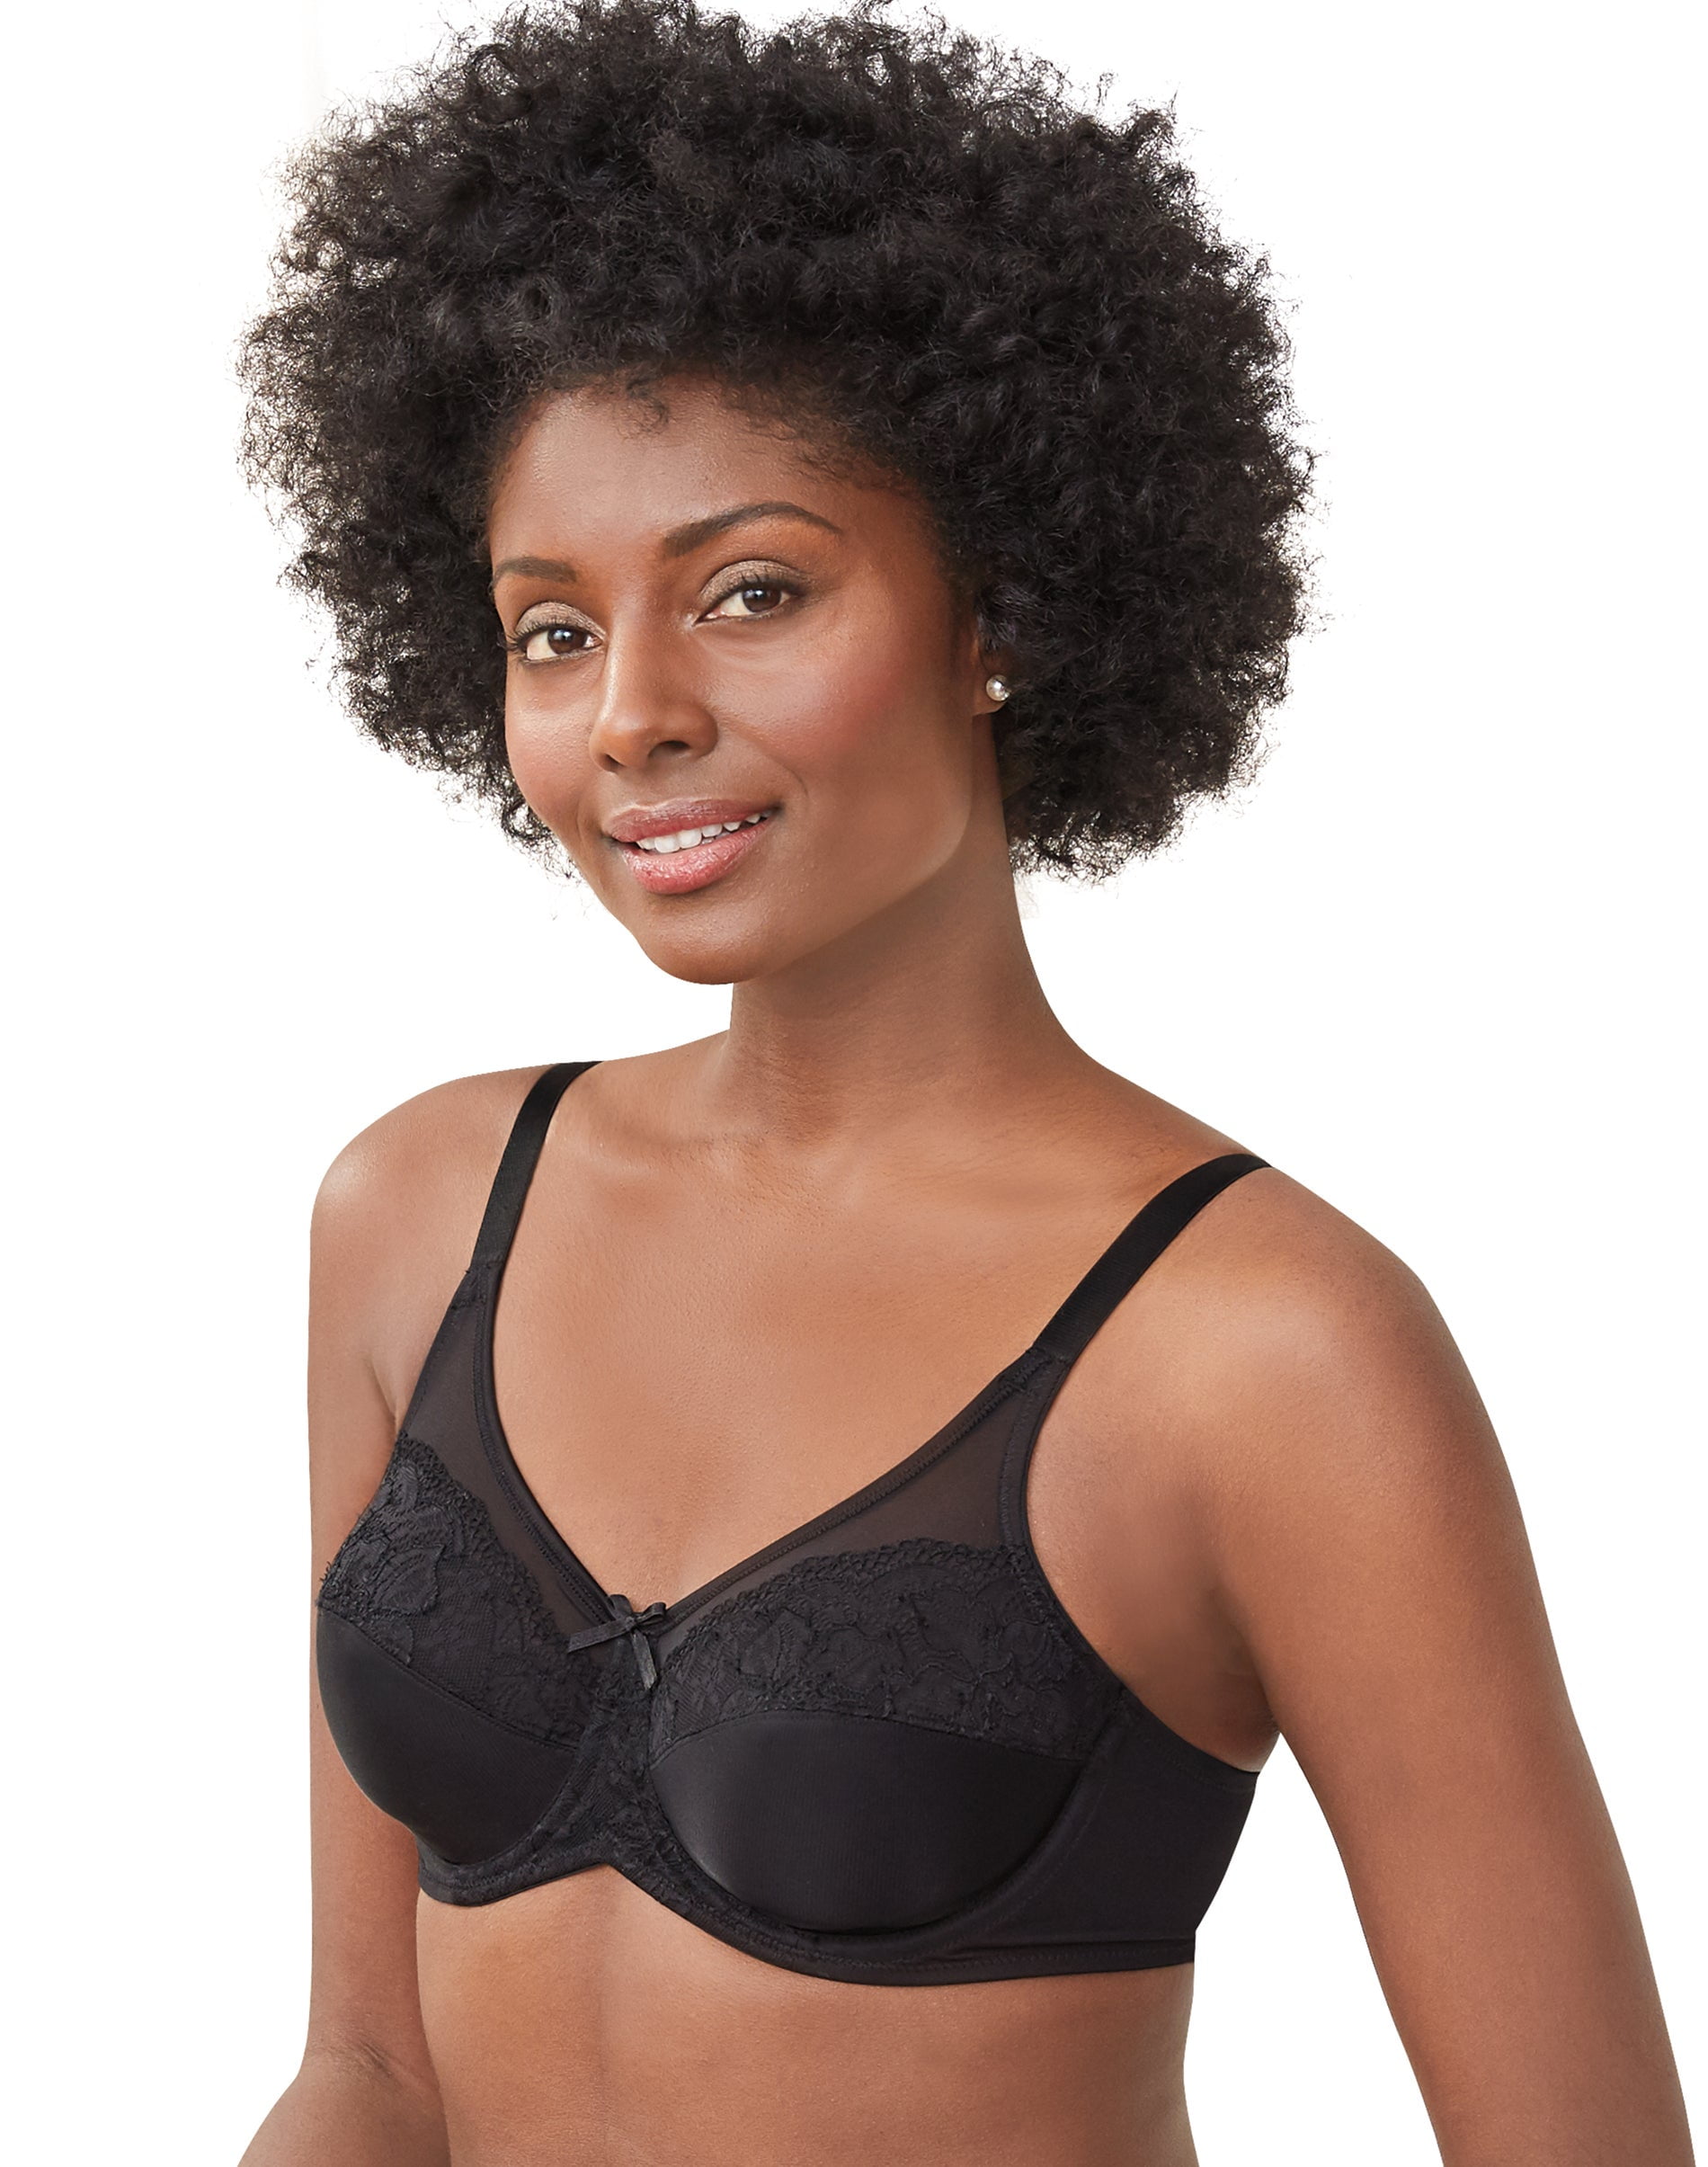 Lilyette Womens Ultimate Smoothing Convertible Minimizer Bra Style-LY0444 